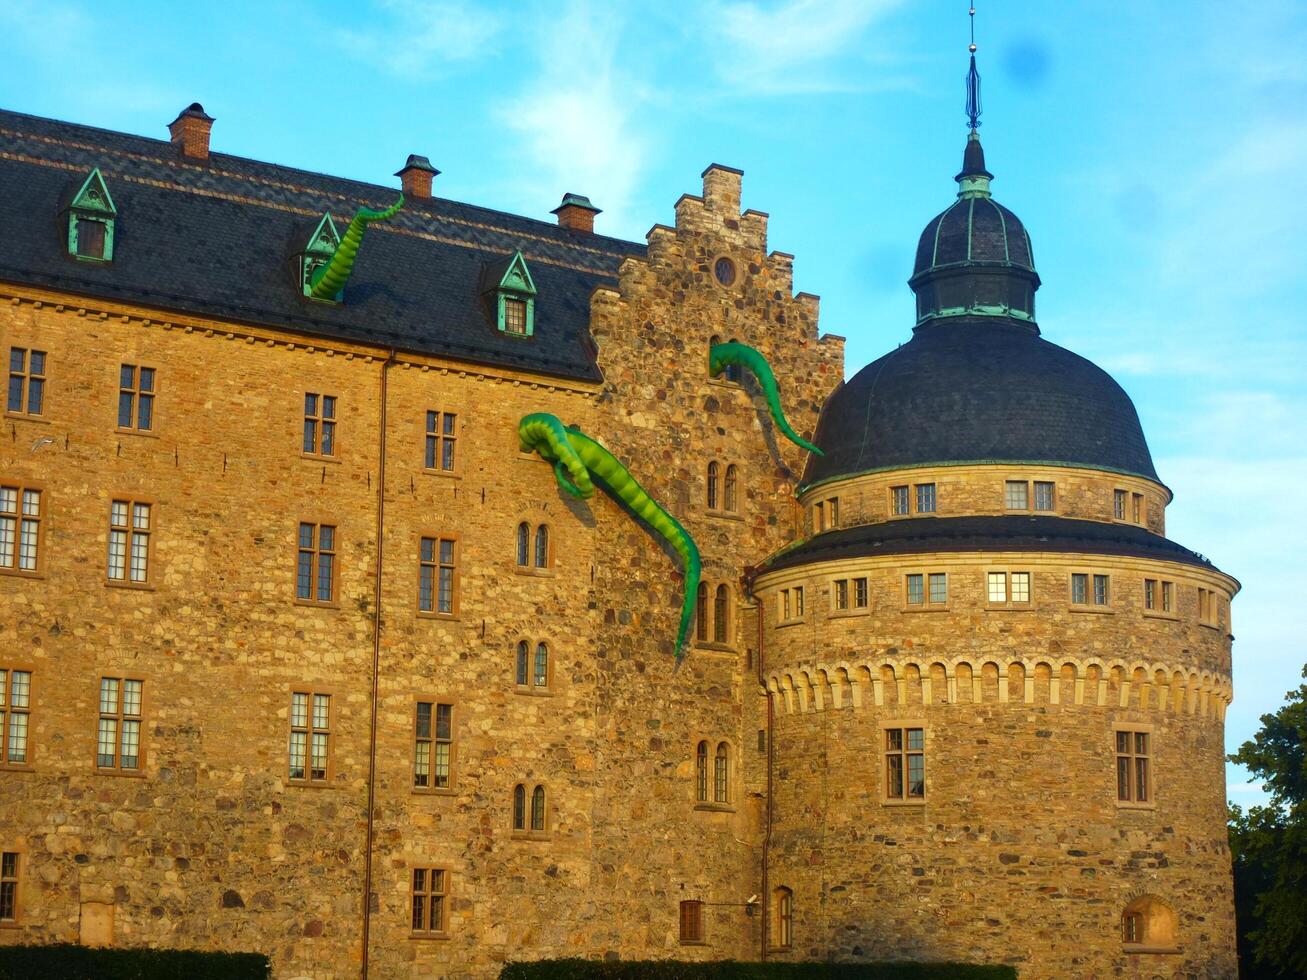 Facade of the ancient castle with dragons during the cultural festival. photo